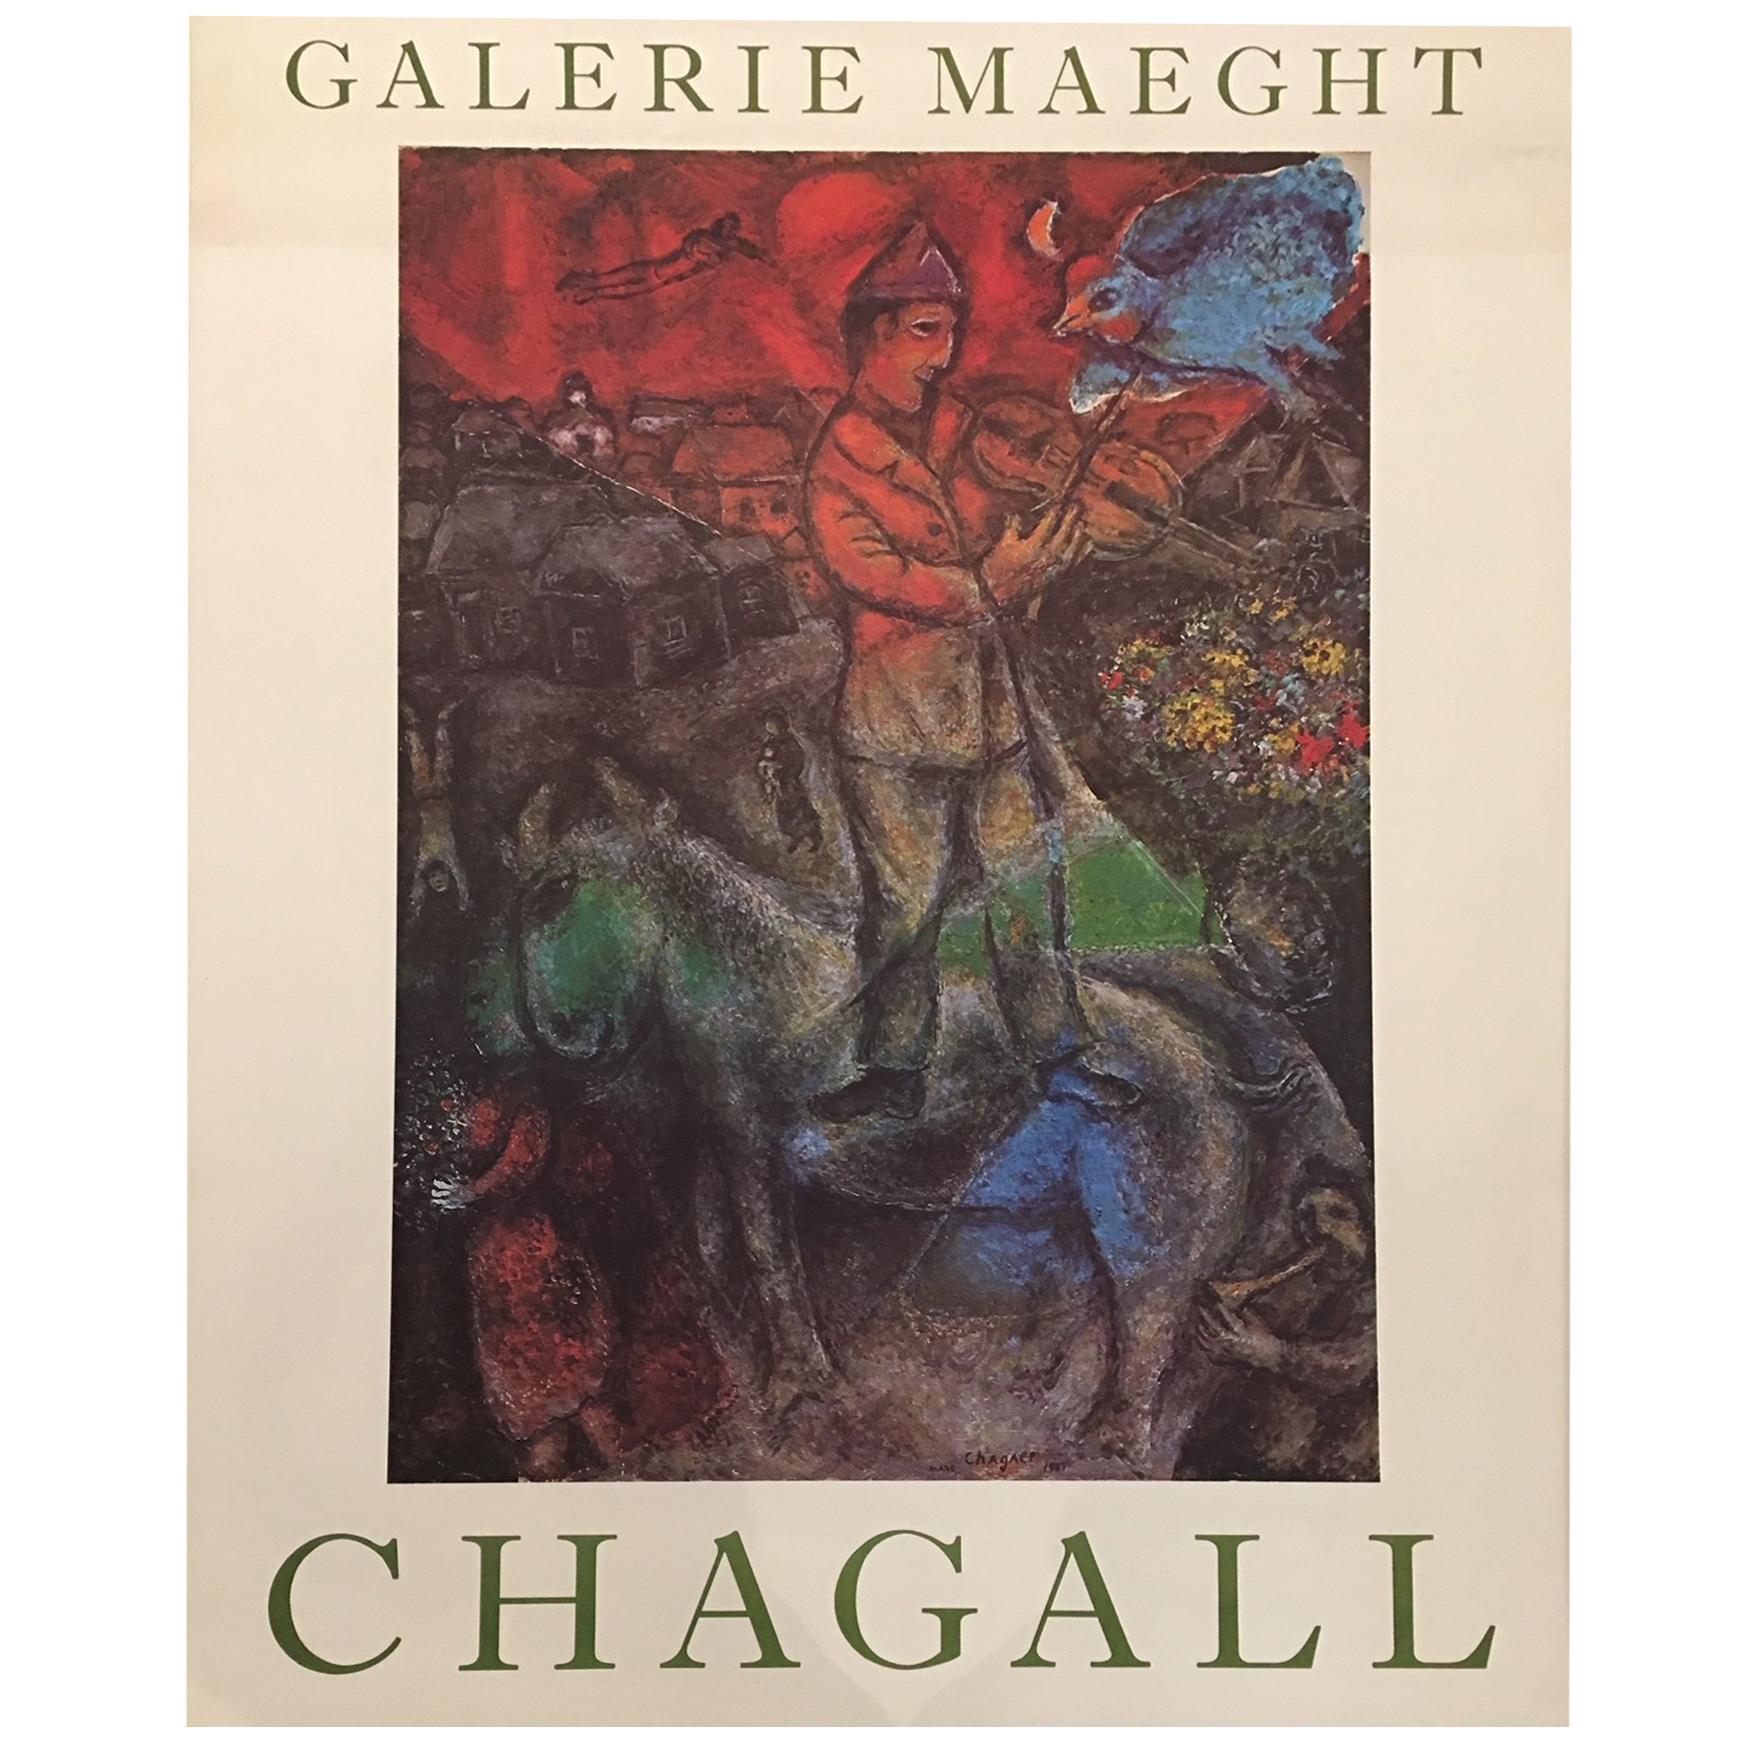 Original Vintage French Poster, Chagall Galerie Maeght, 1975